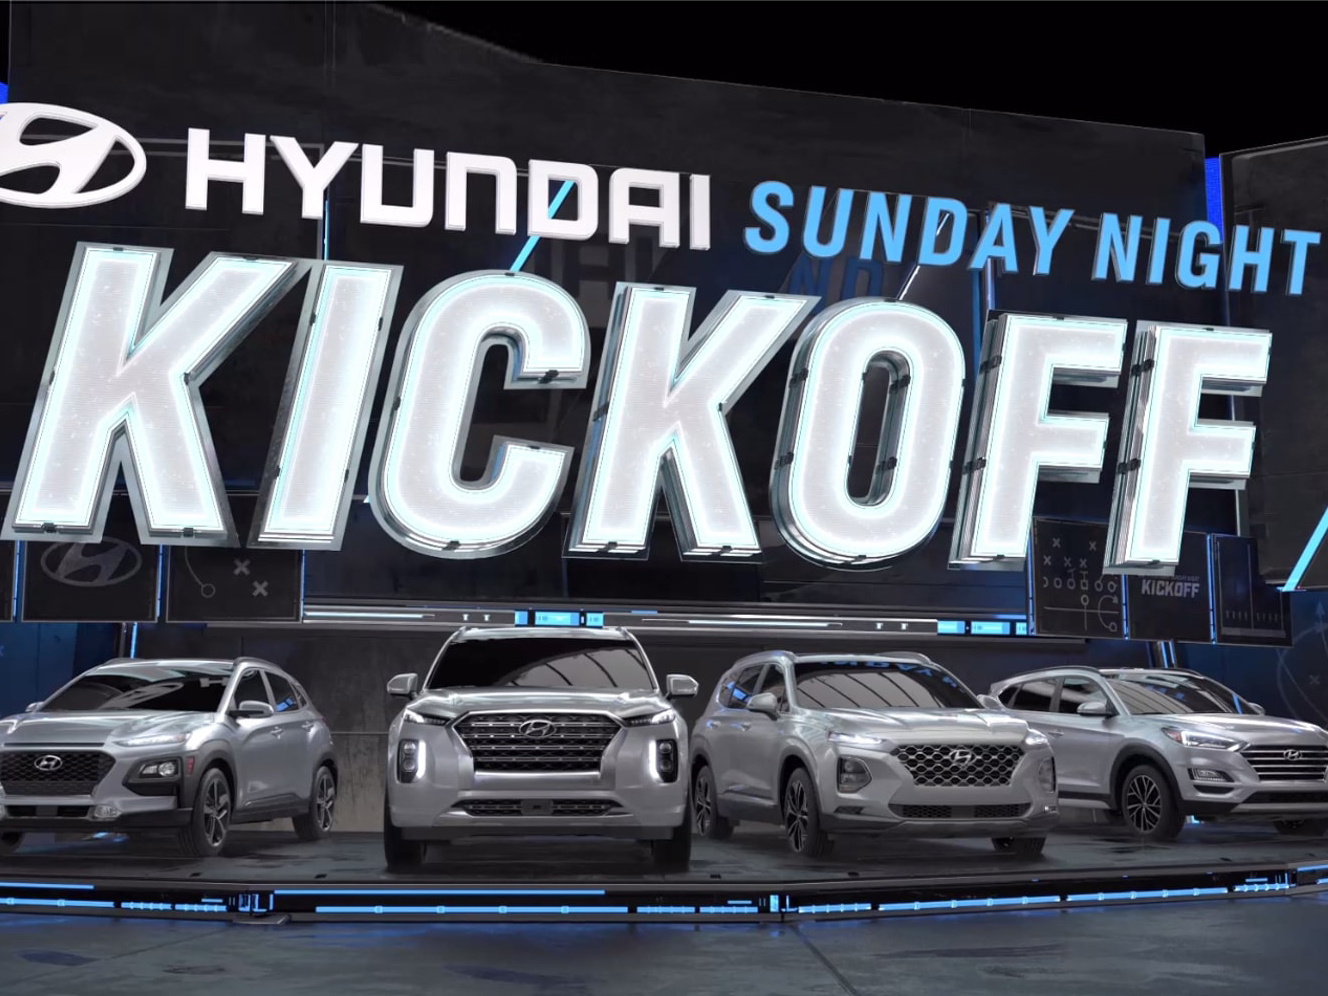 Hyundai will appear as the sponsor of the Sunday Night Football Kickoff Show.